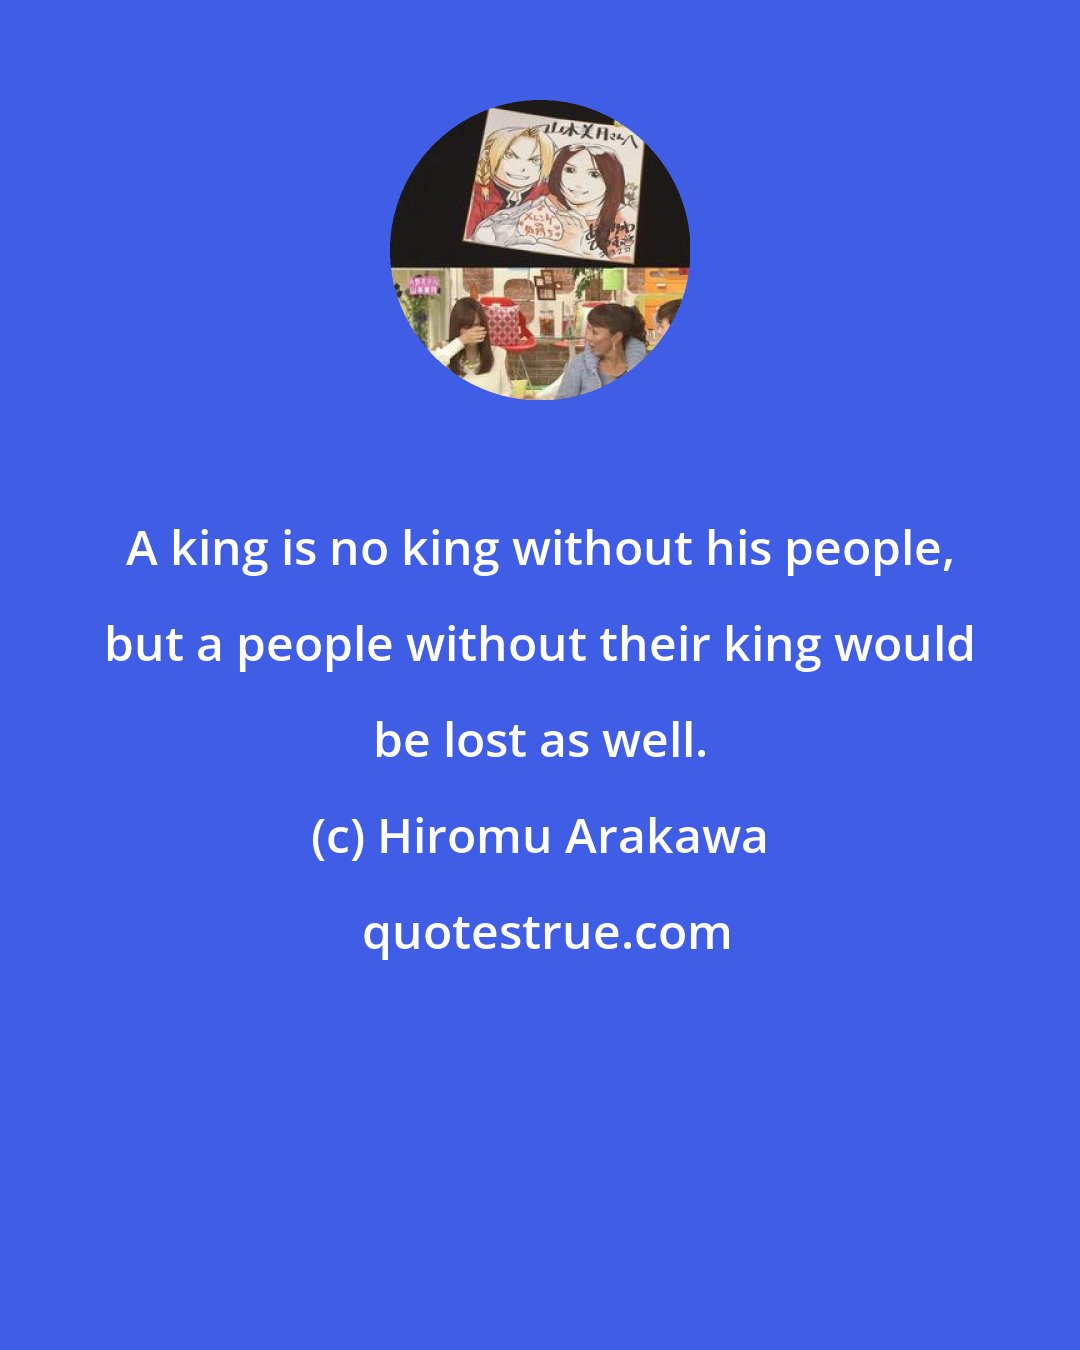 Hiromu Arakawa: A king is no king without his people, but a people without their king would be lost as well.